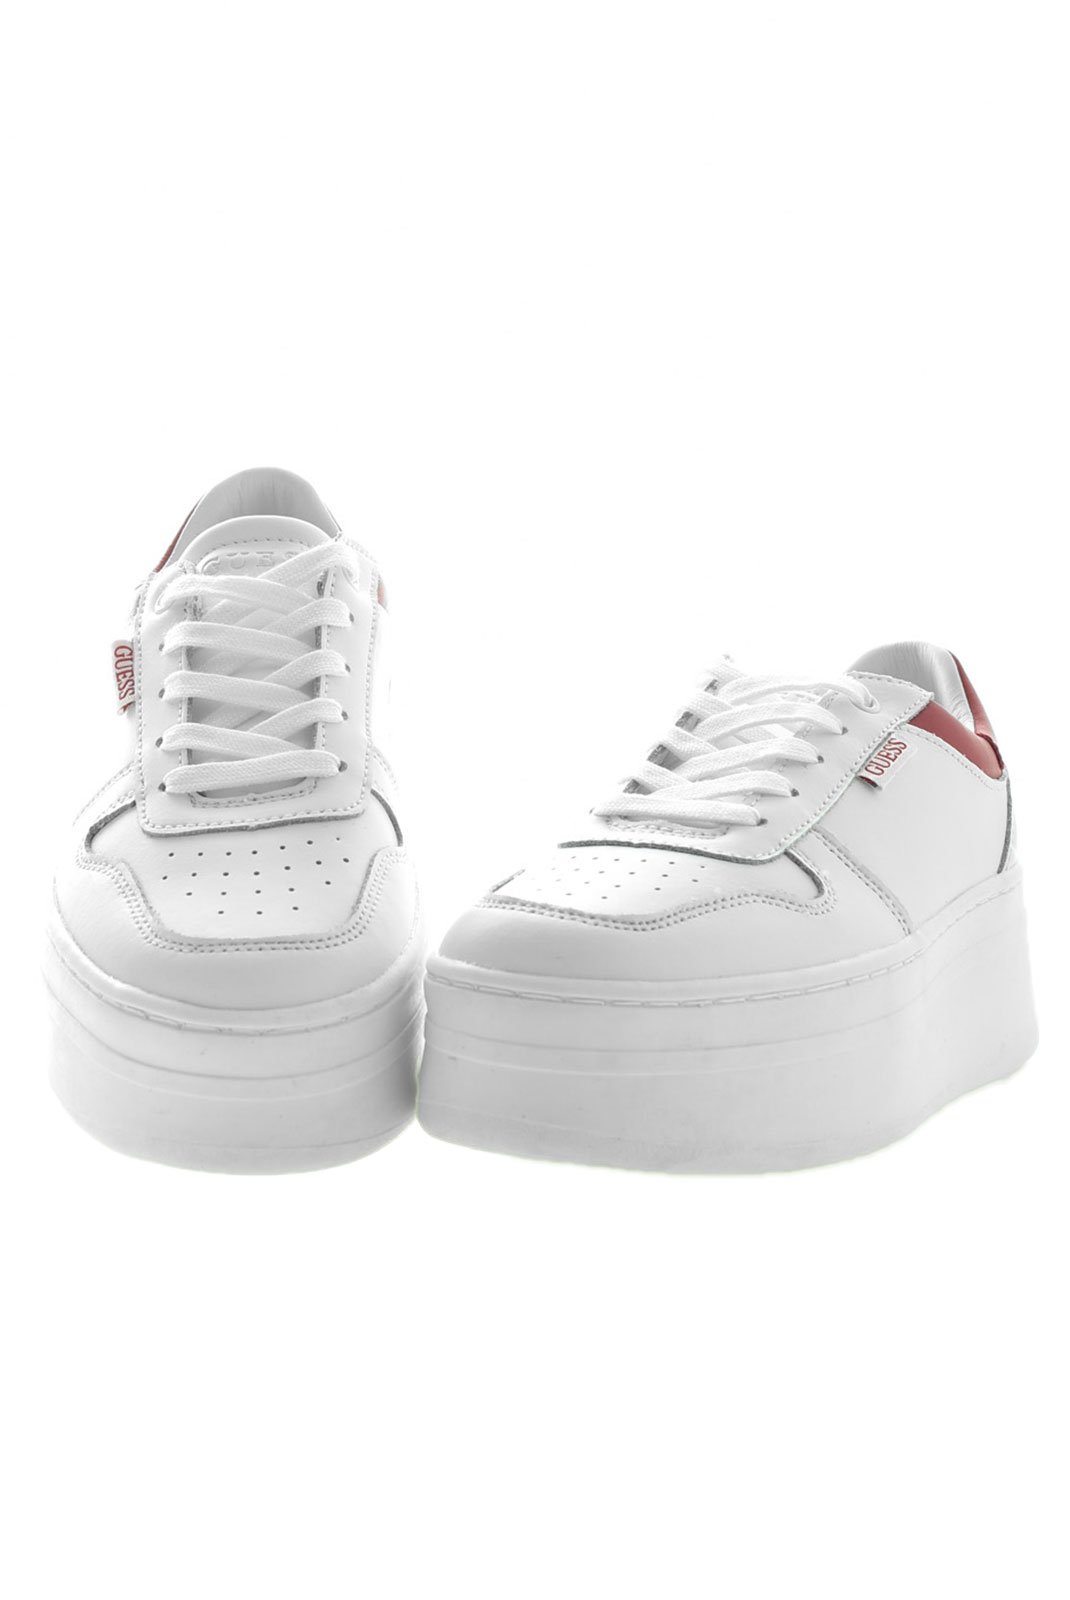 Chaussures  Guess jeans FL6LIF LEA12 WHITE RED